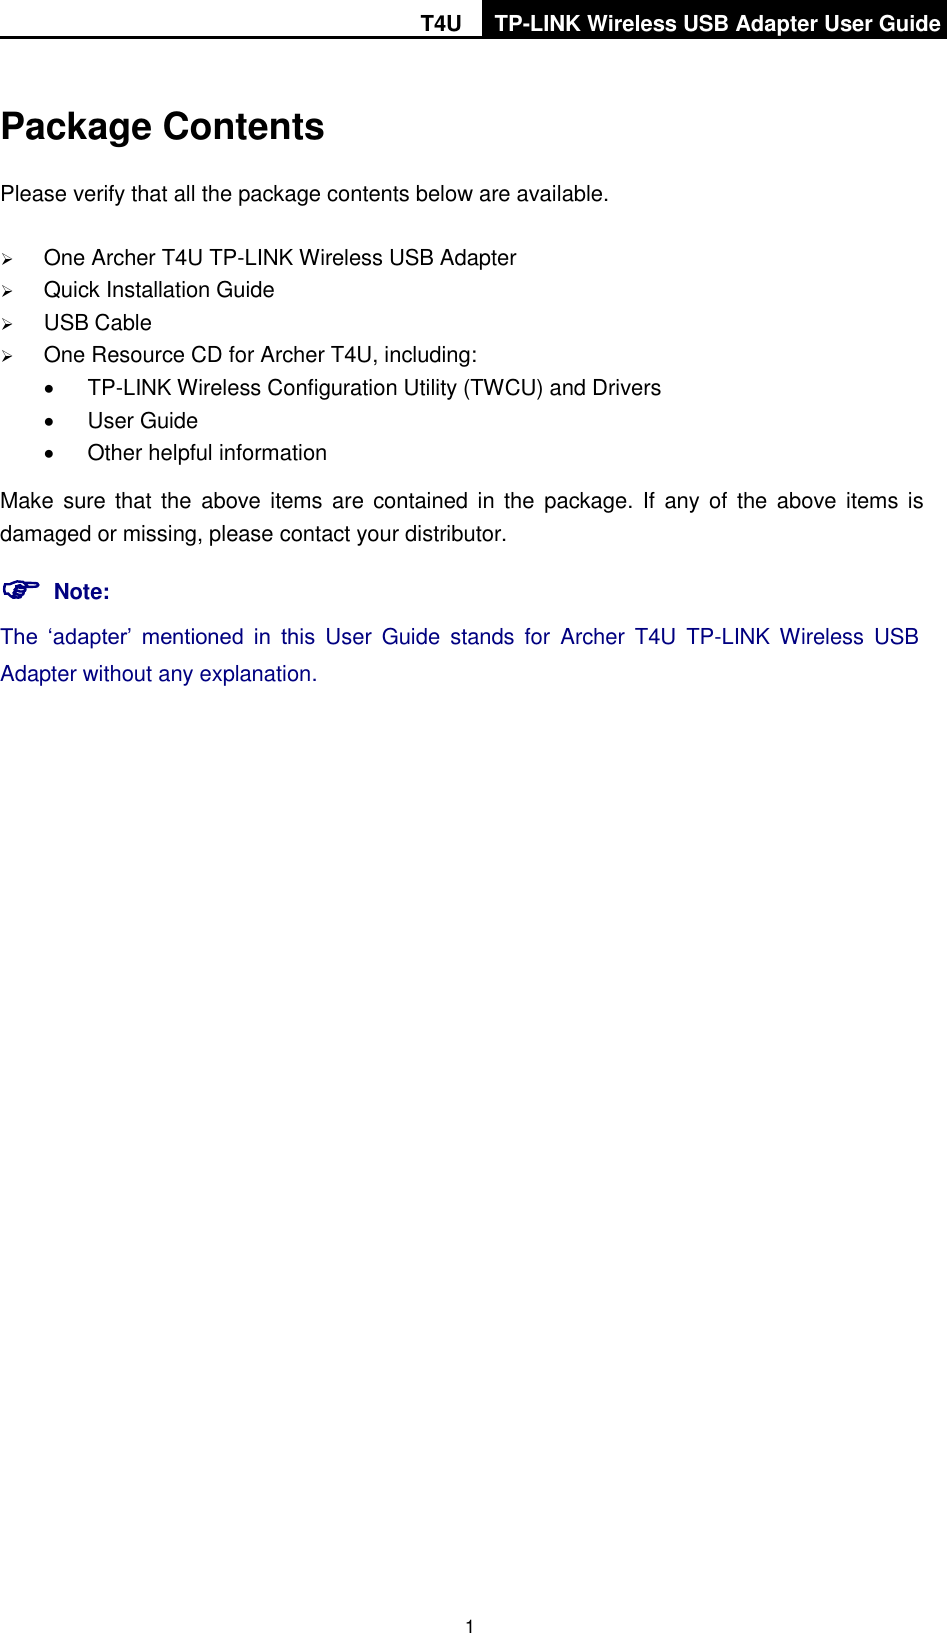   T4U TP-LINK Wireless USB Adapter User Guide    1 Package Contents Please verify that all the package contents below are available.  One Archer T4U TP-LINK Wireless USB Adapter  Quick Installation Guide  USB Cable  One Resource CD for Archer T4U, including:  TP-LINK Wireless Configuration Utility (TWCU) and Drivers   User Guide   Other helpful information Make sure that  the above items  are contained in the  package. If  any of the  above  items is damaged or missing, please contact your distributor.  Note: The  ‘adapter’  mentioned  in  this  User  Guide  stands  for  Archer  T4U  TP-LINK Wireless  USB Adapter without any explanation. 